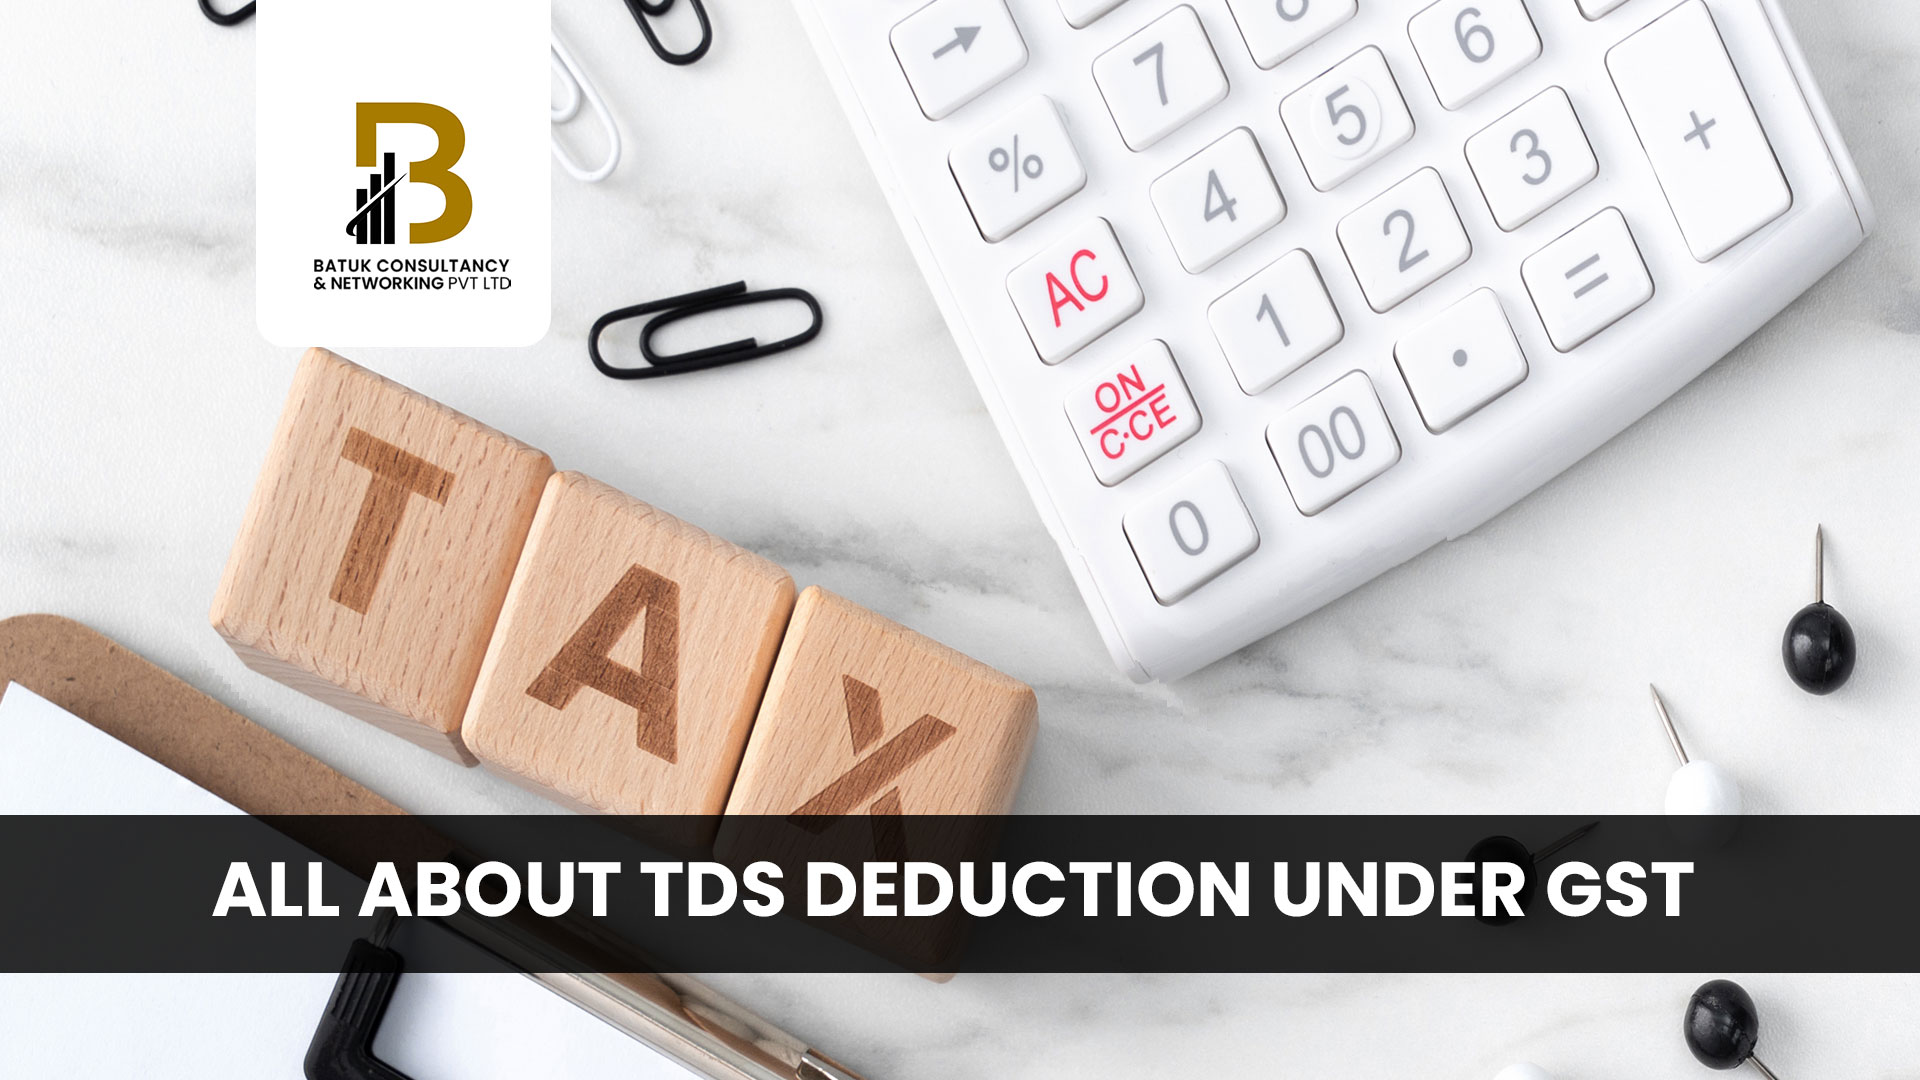 All About TDS Deduction under GST